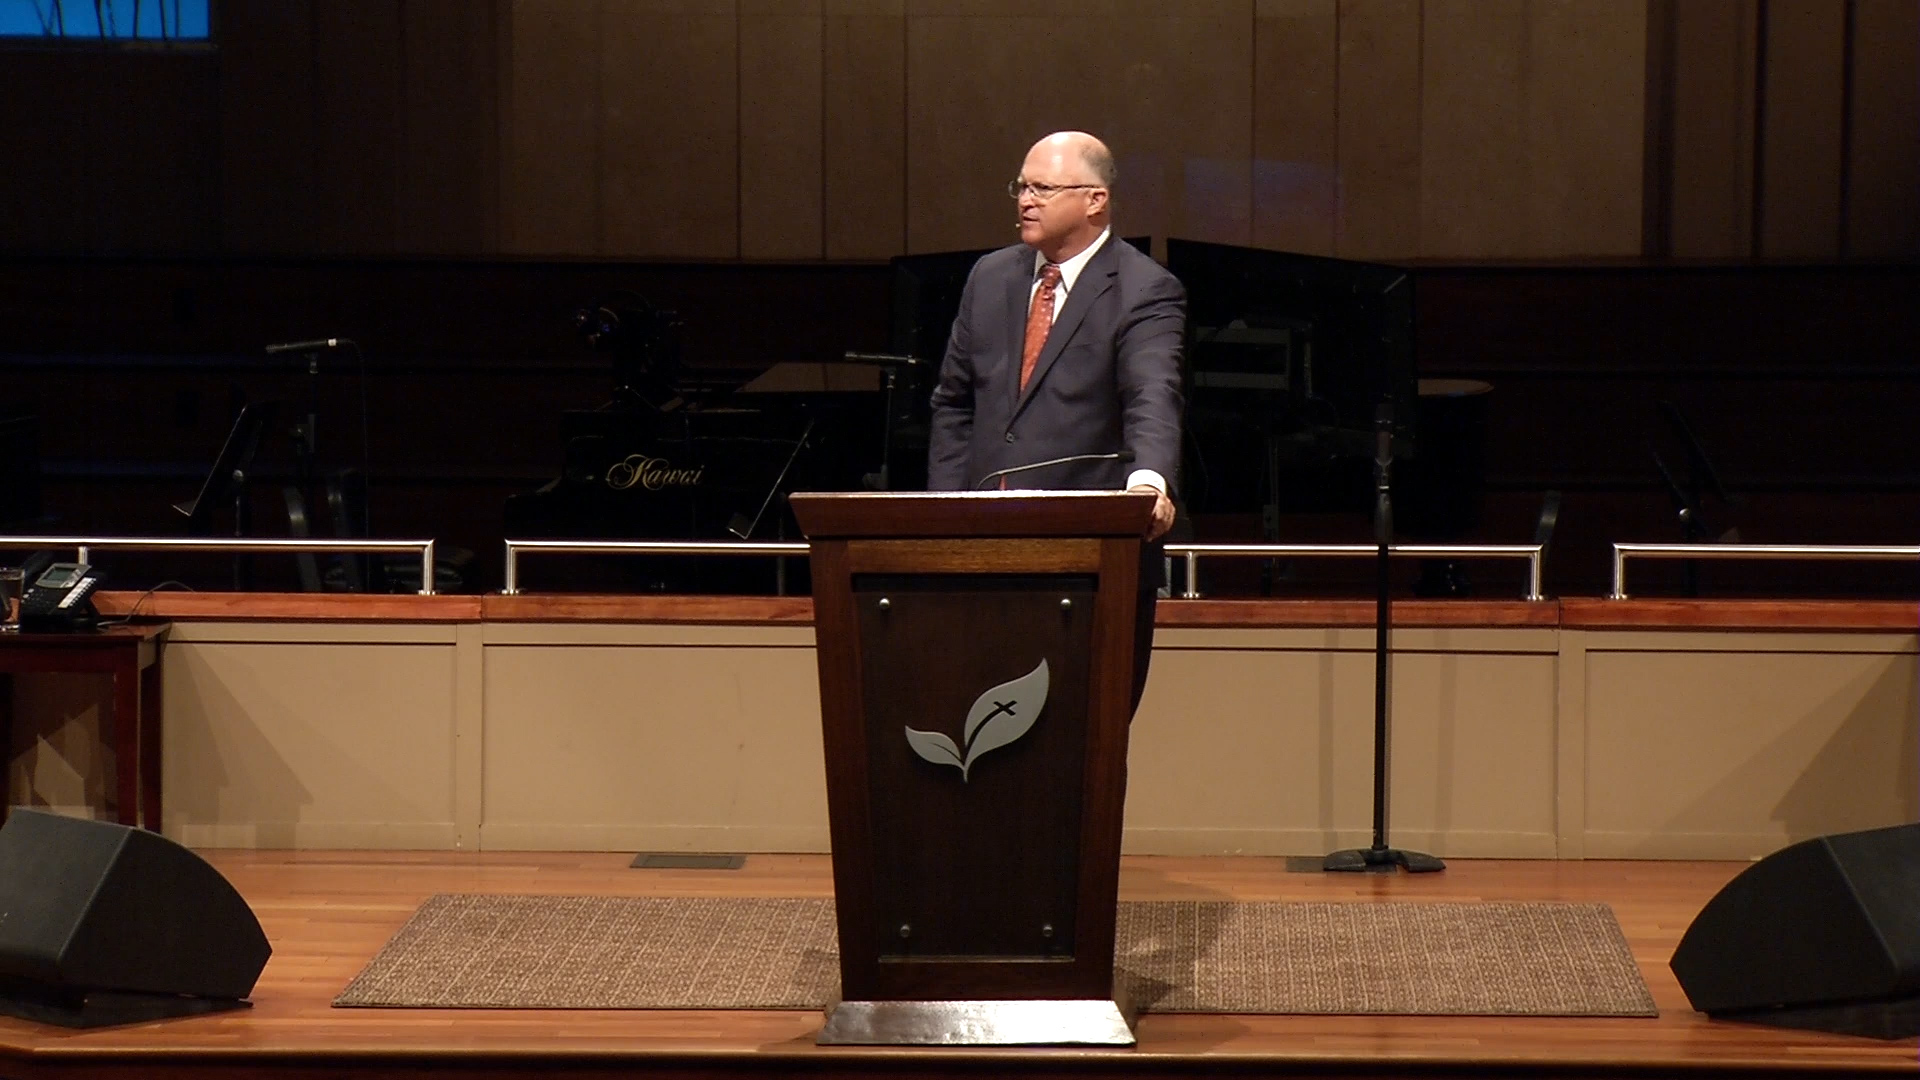 Pastor Paul Chappell: Jesus Can Build